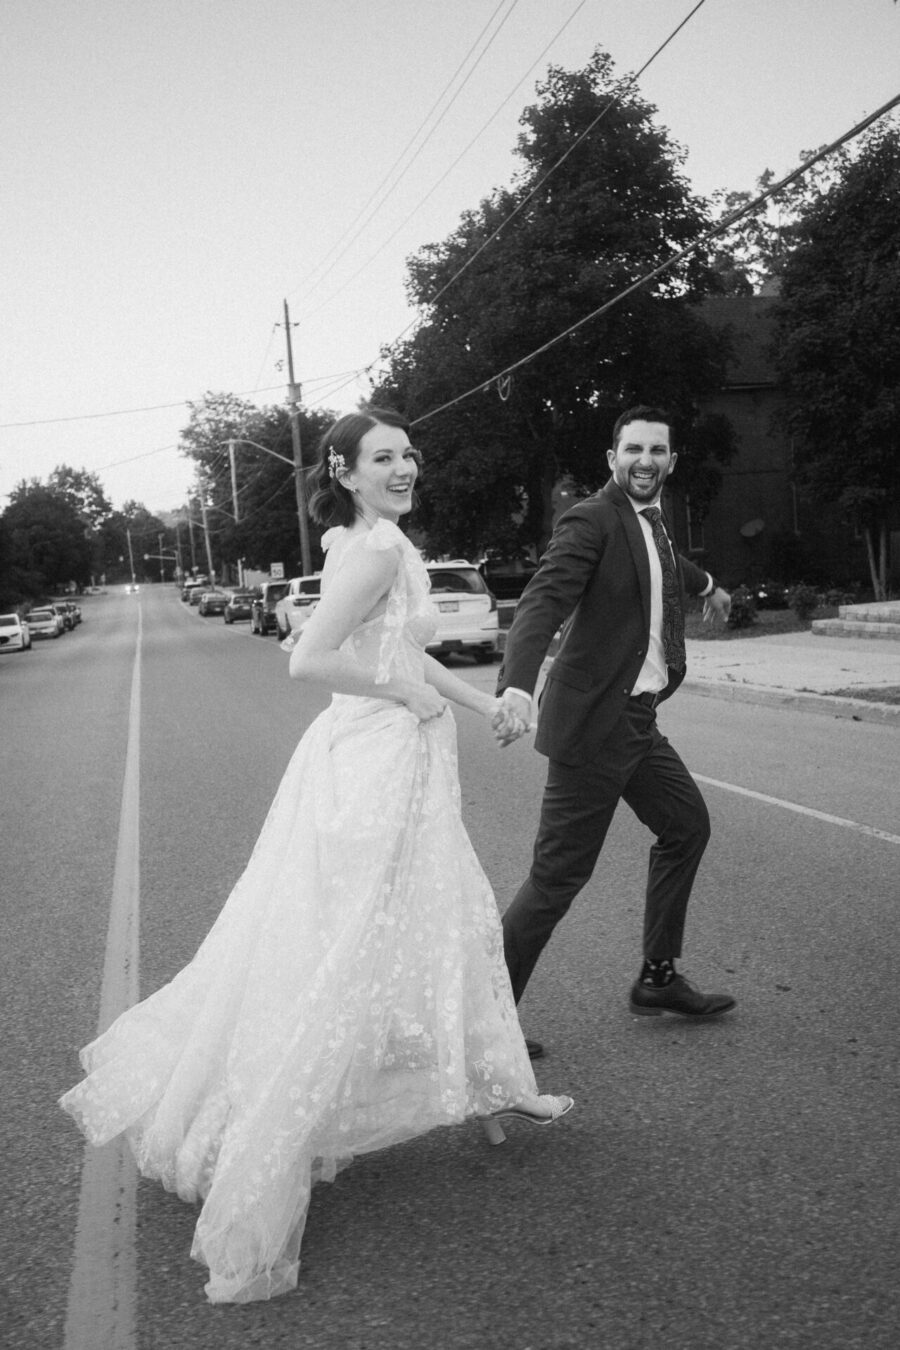 bride and groom run across a road together